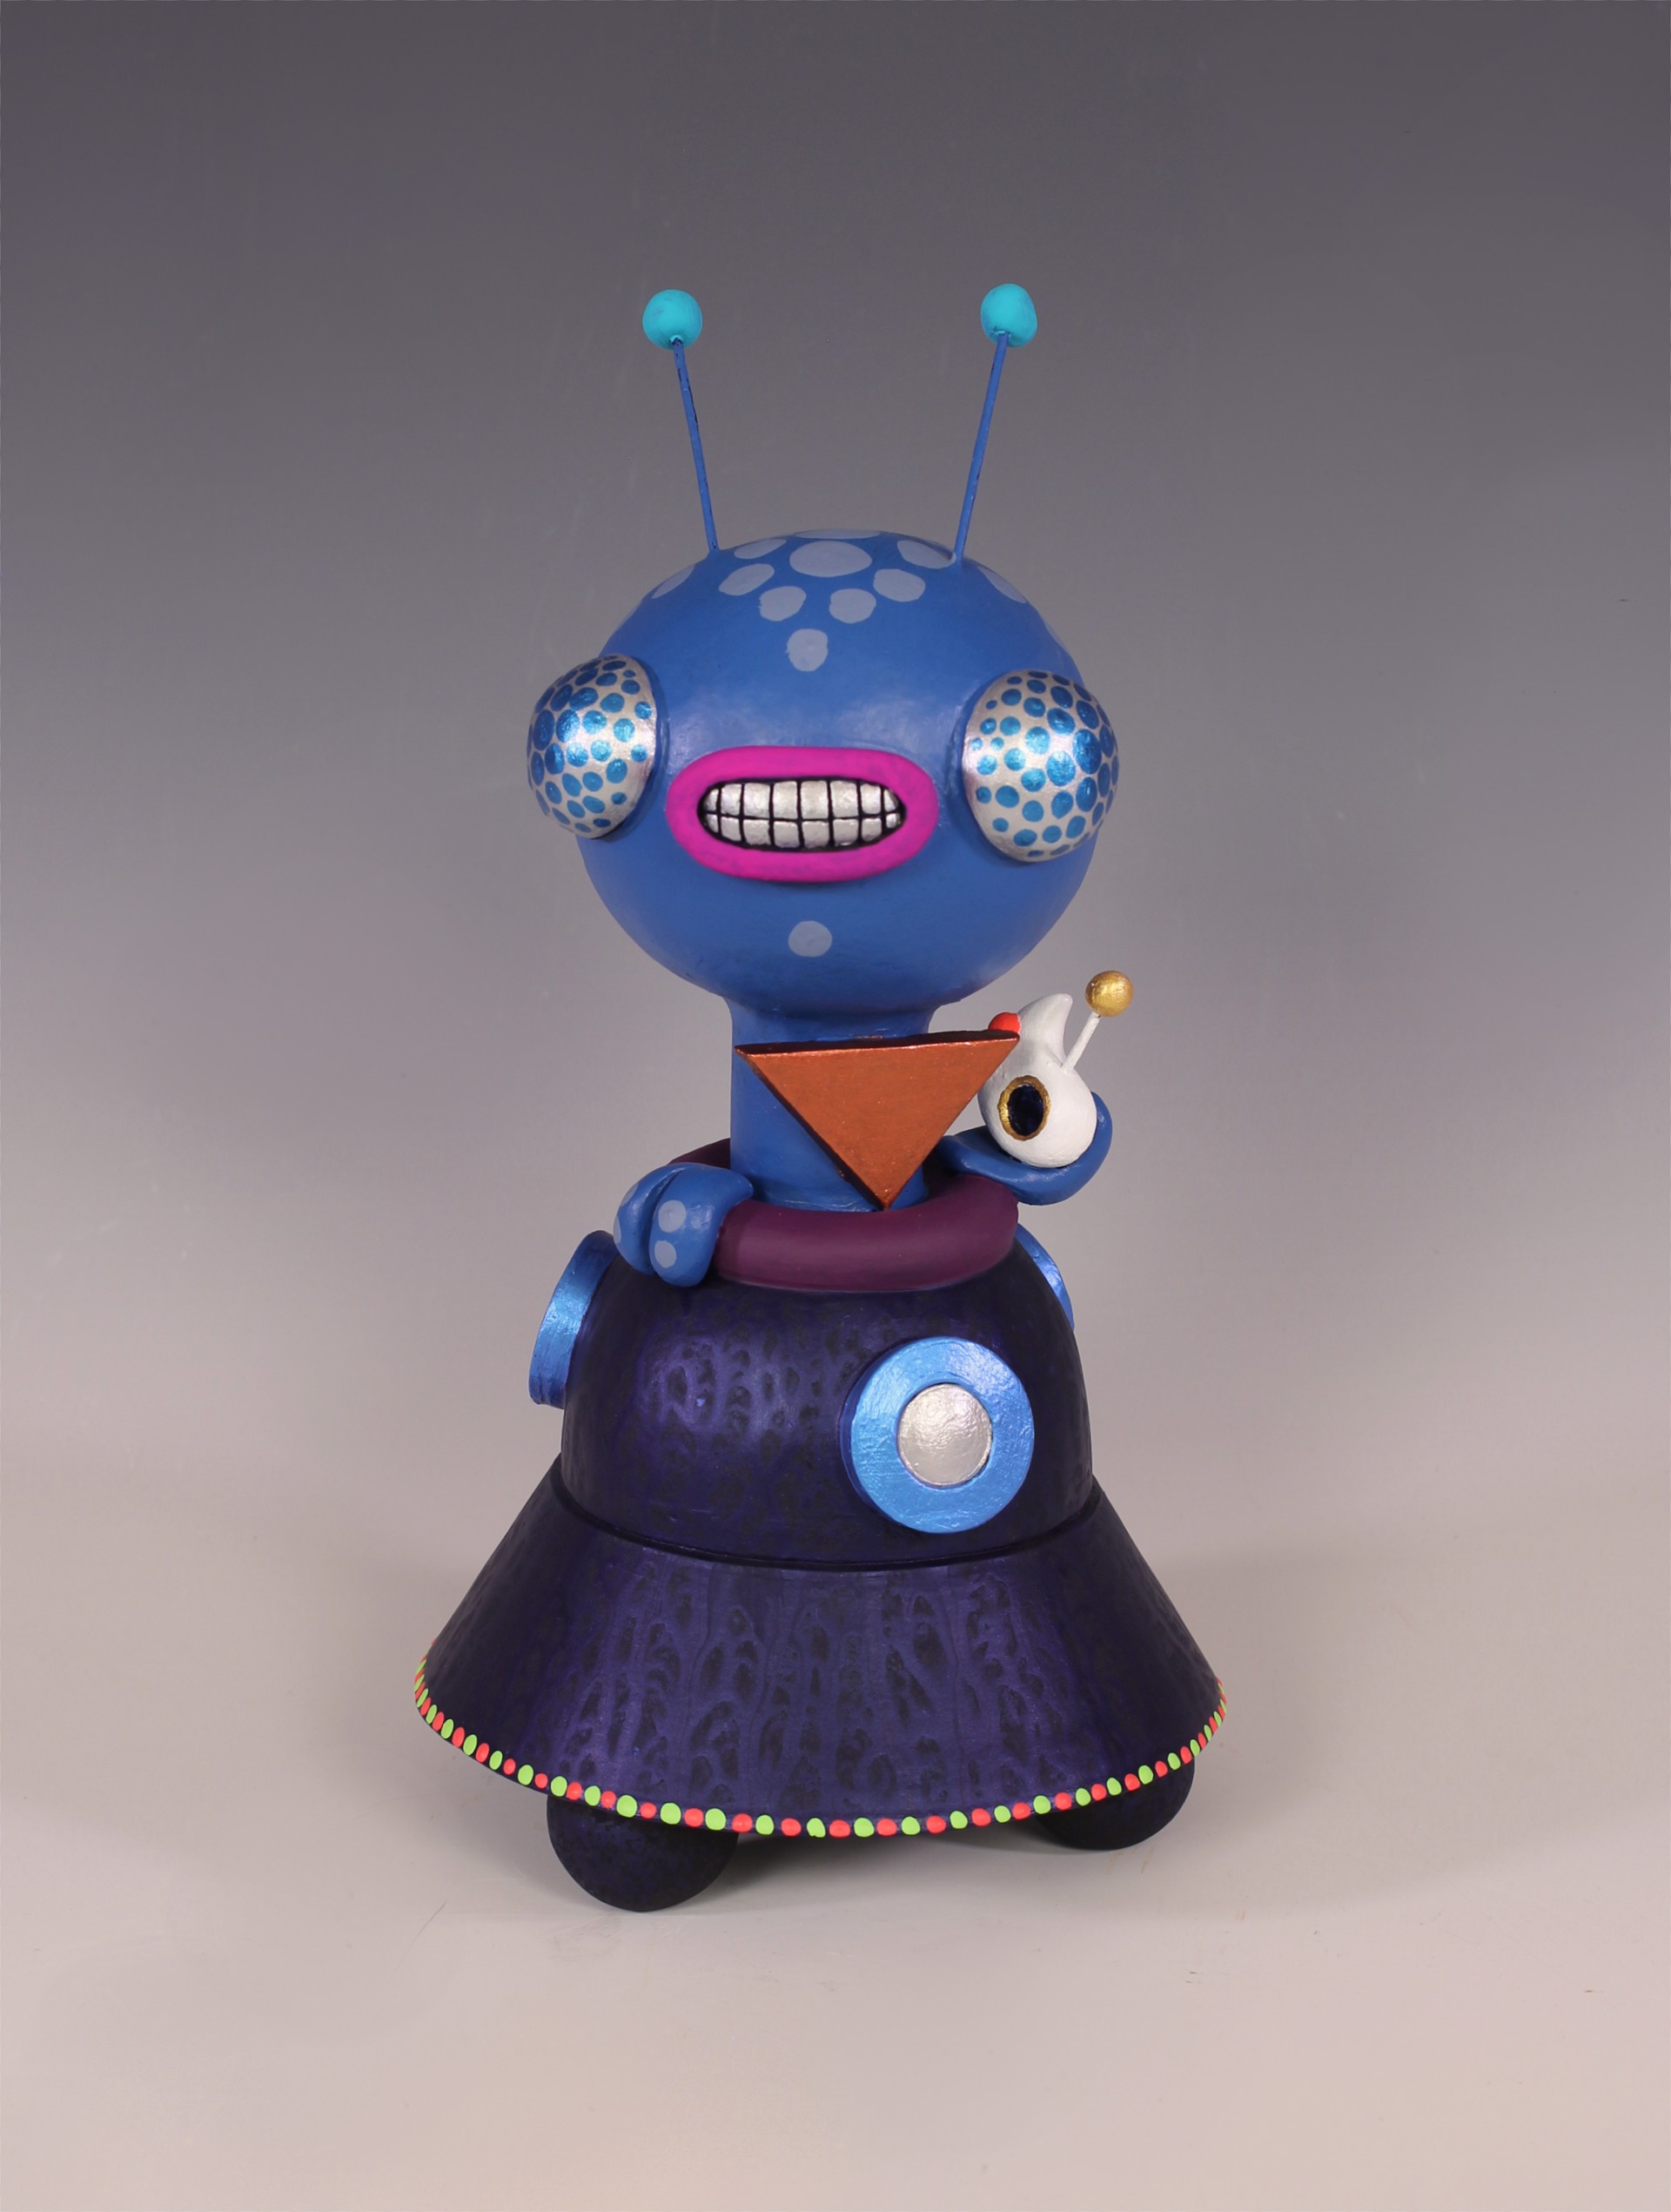 Beverly Buzby’s Blue Giant Buzzer by Max Lehman